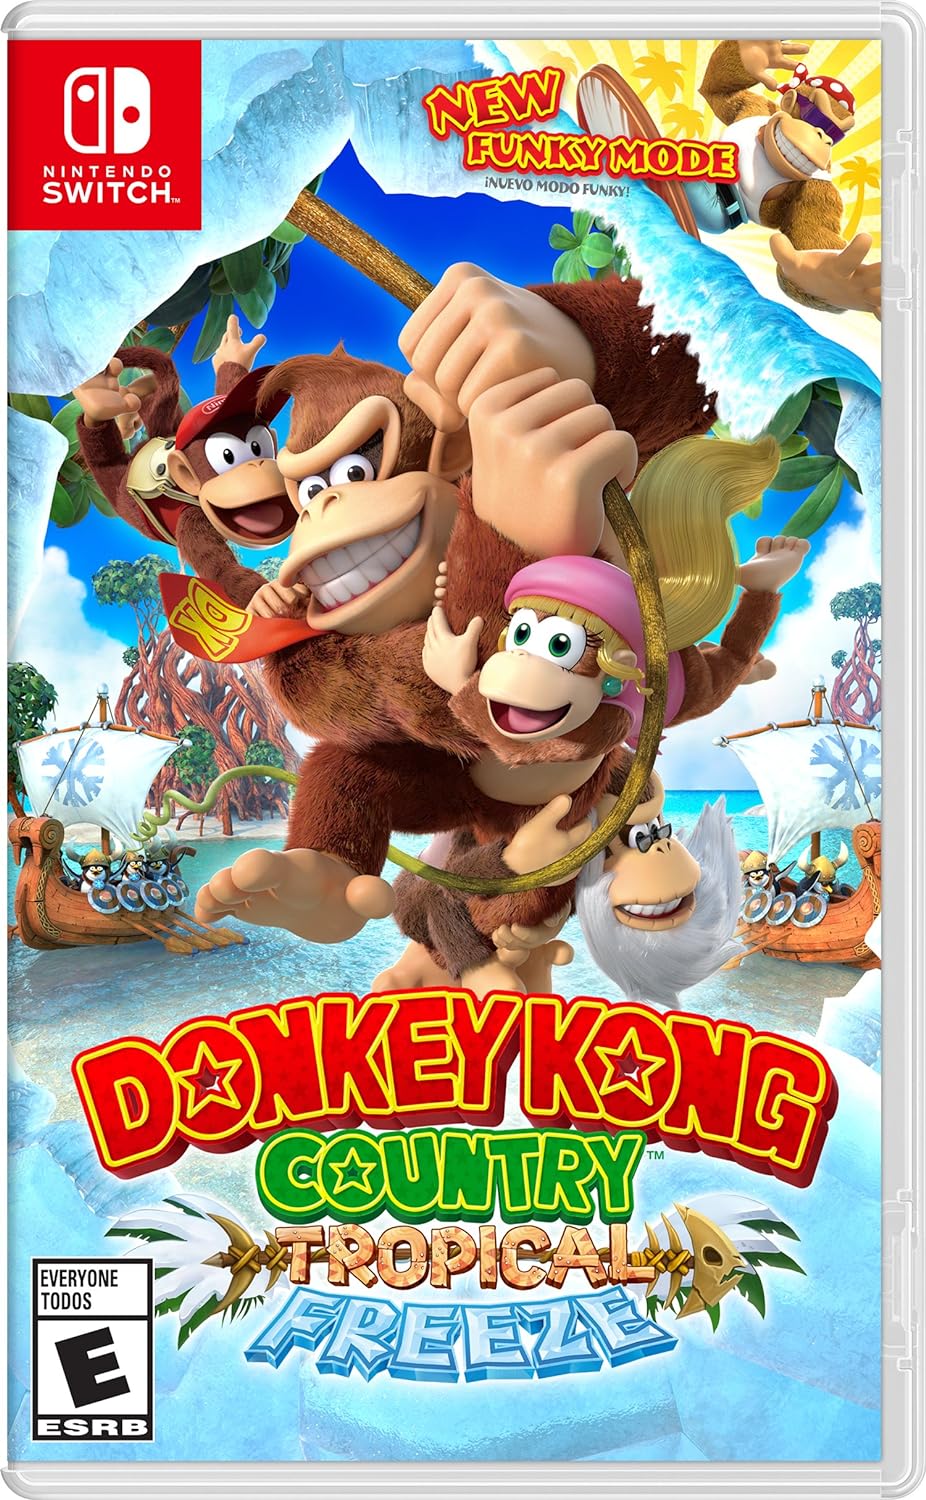 Donkey Kong Country: Tropical Freeze - Nintendo Switch (Physical) - $39.99